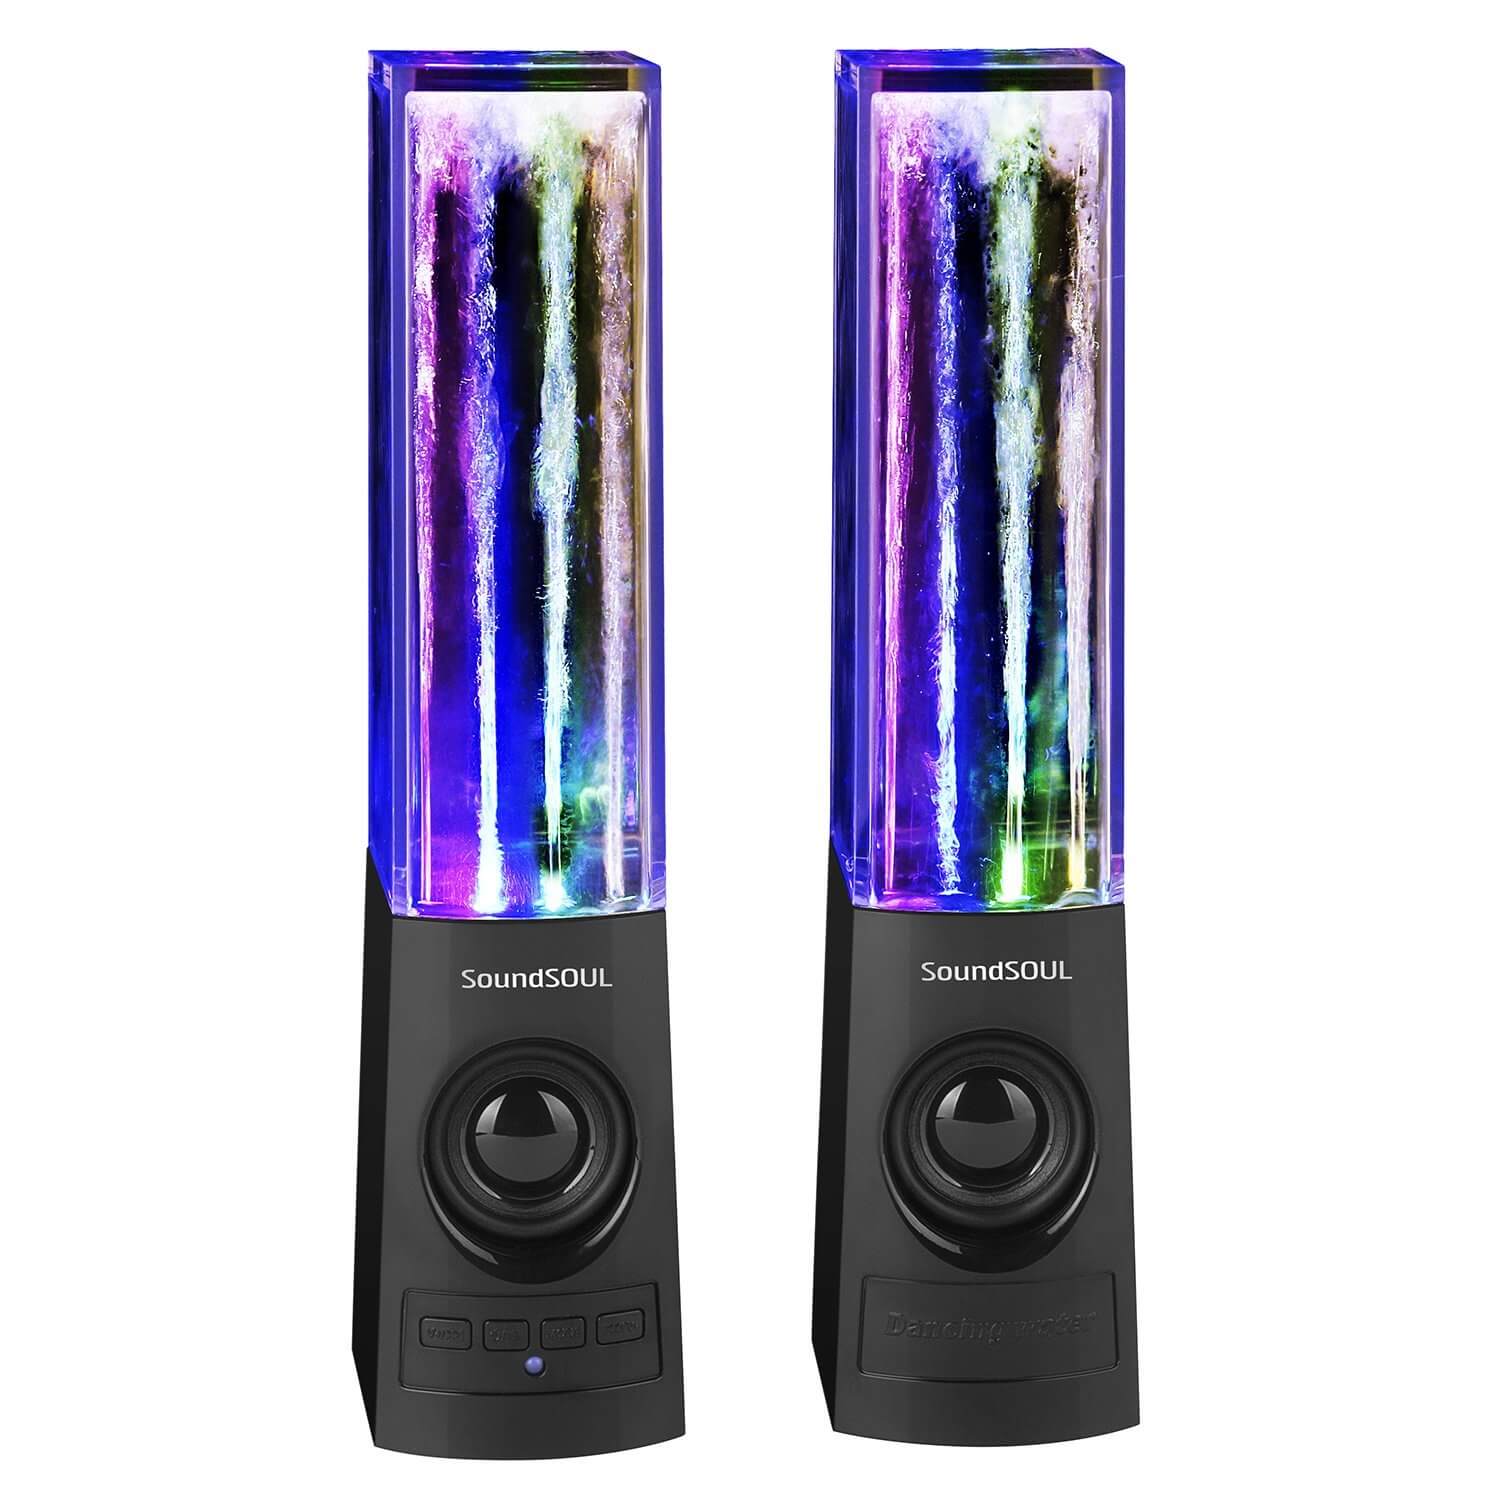 SoundSOUL Bluetooth Dancing Water Speaker With Lights